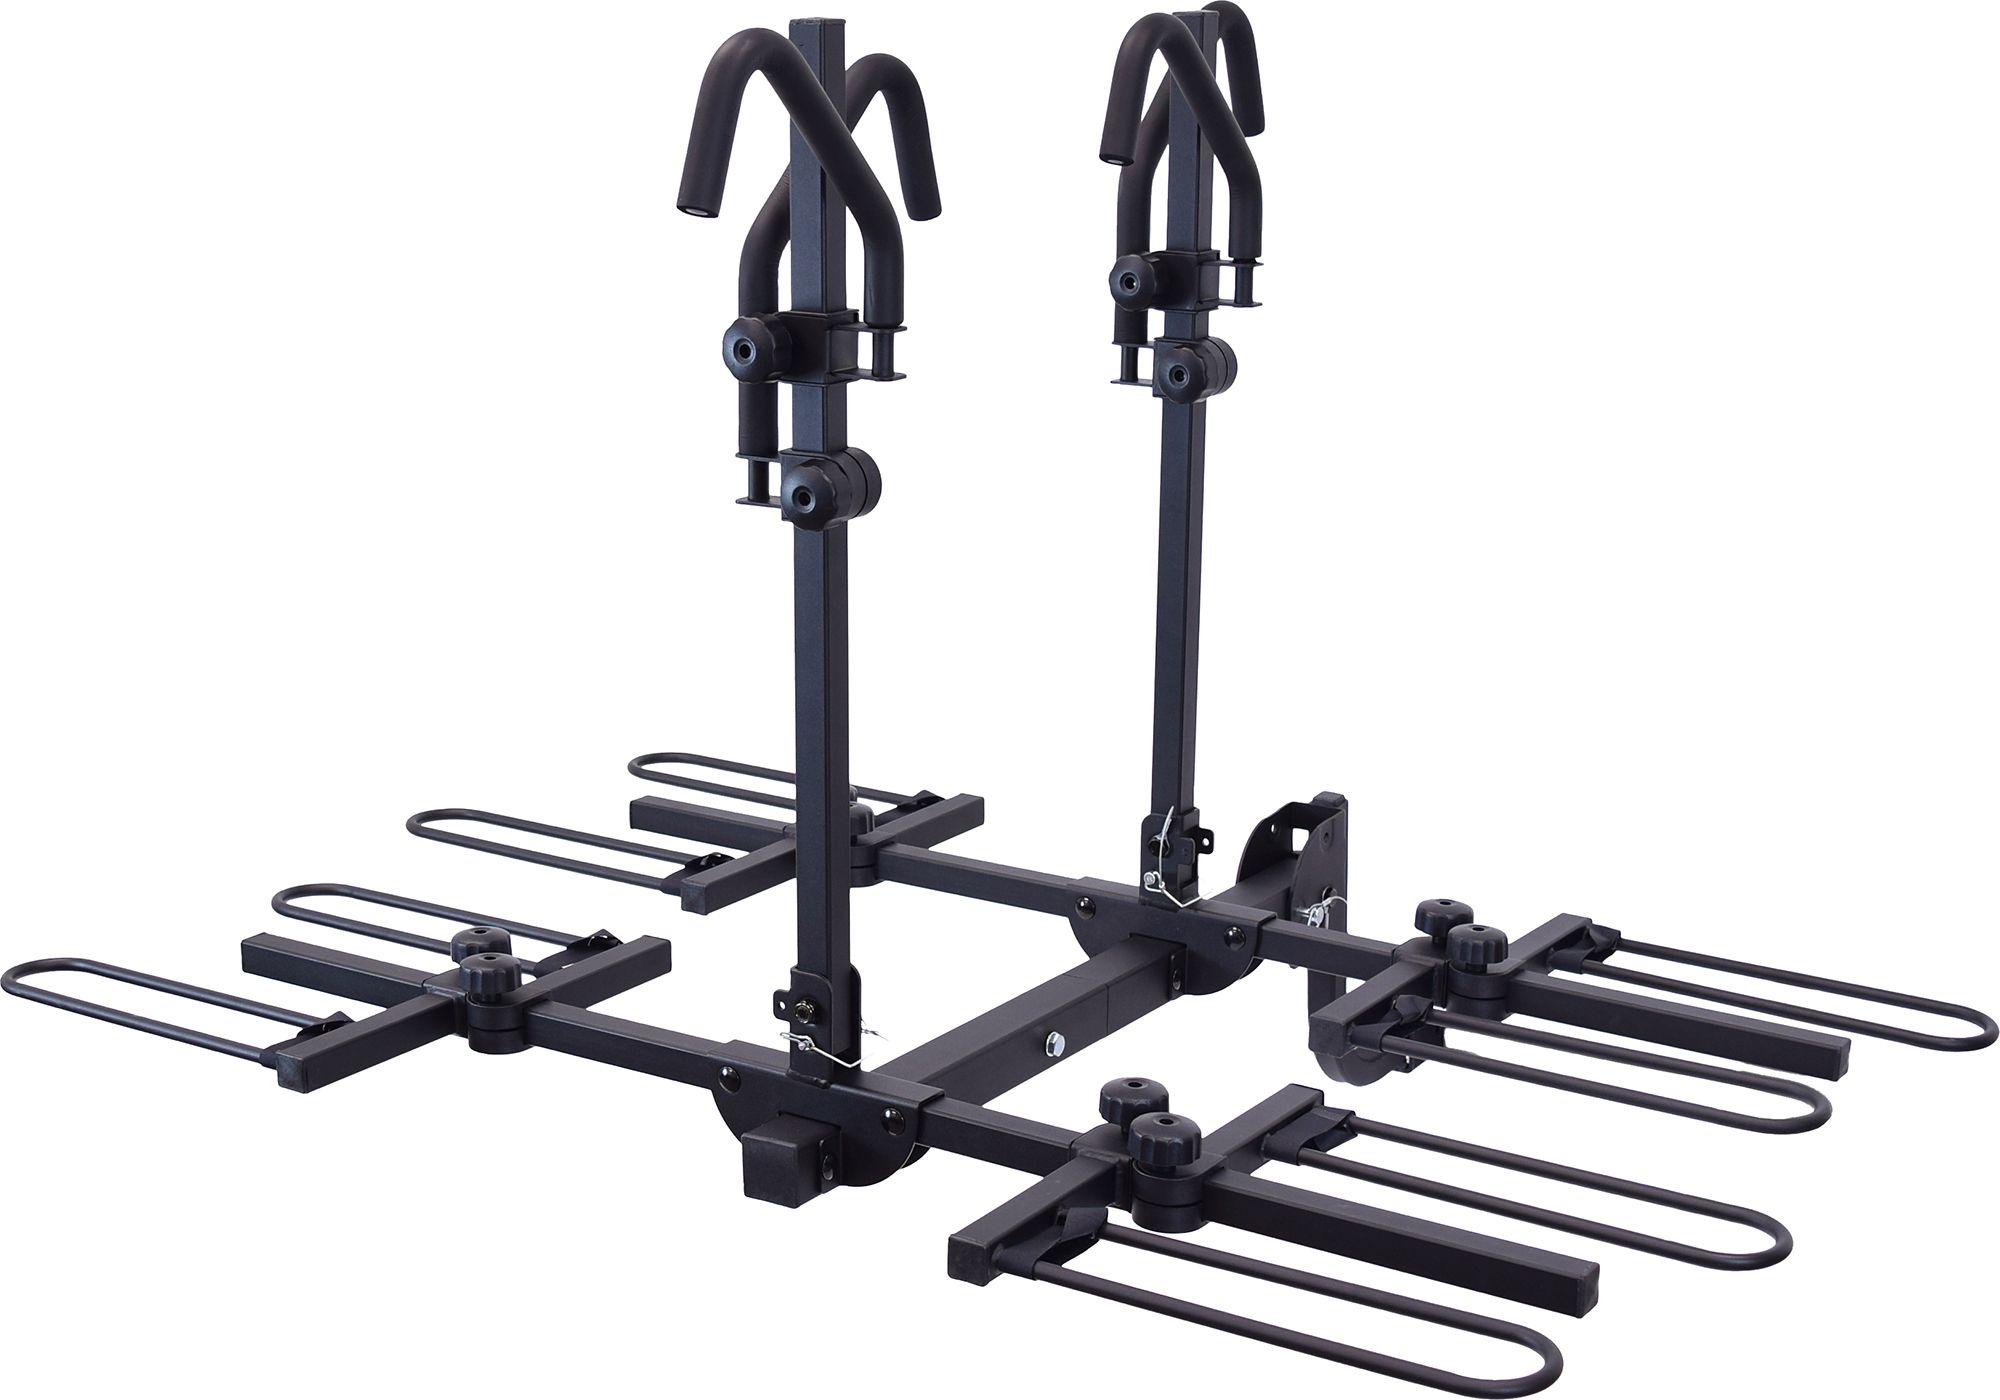 Photos - Cycling Clothing Malone Runway HM4 - Hitch Mount Platform 4 Bike Carrier , Black 2(2" only)